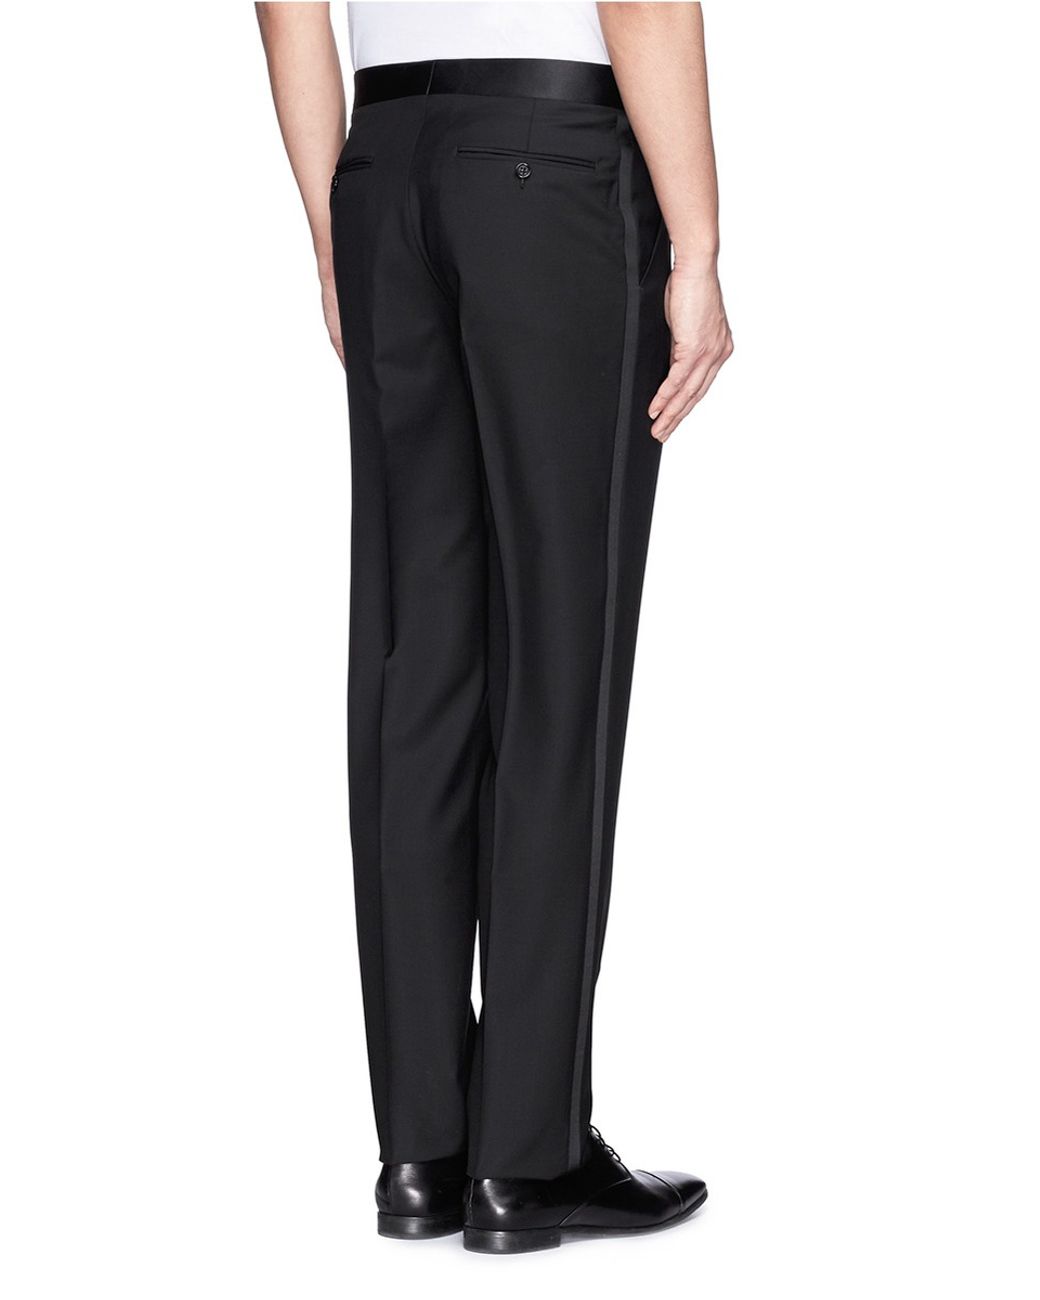 BASICS Casual Trousers  Buy Basics Tapered Fit Black Satin Trousers Online   Nykaa Fashion